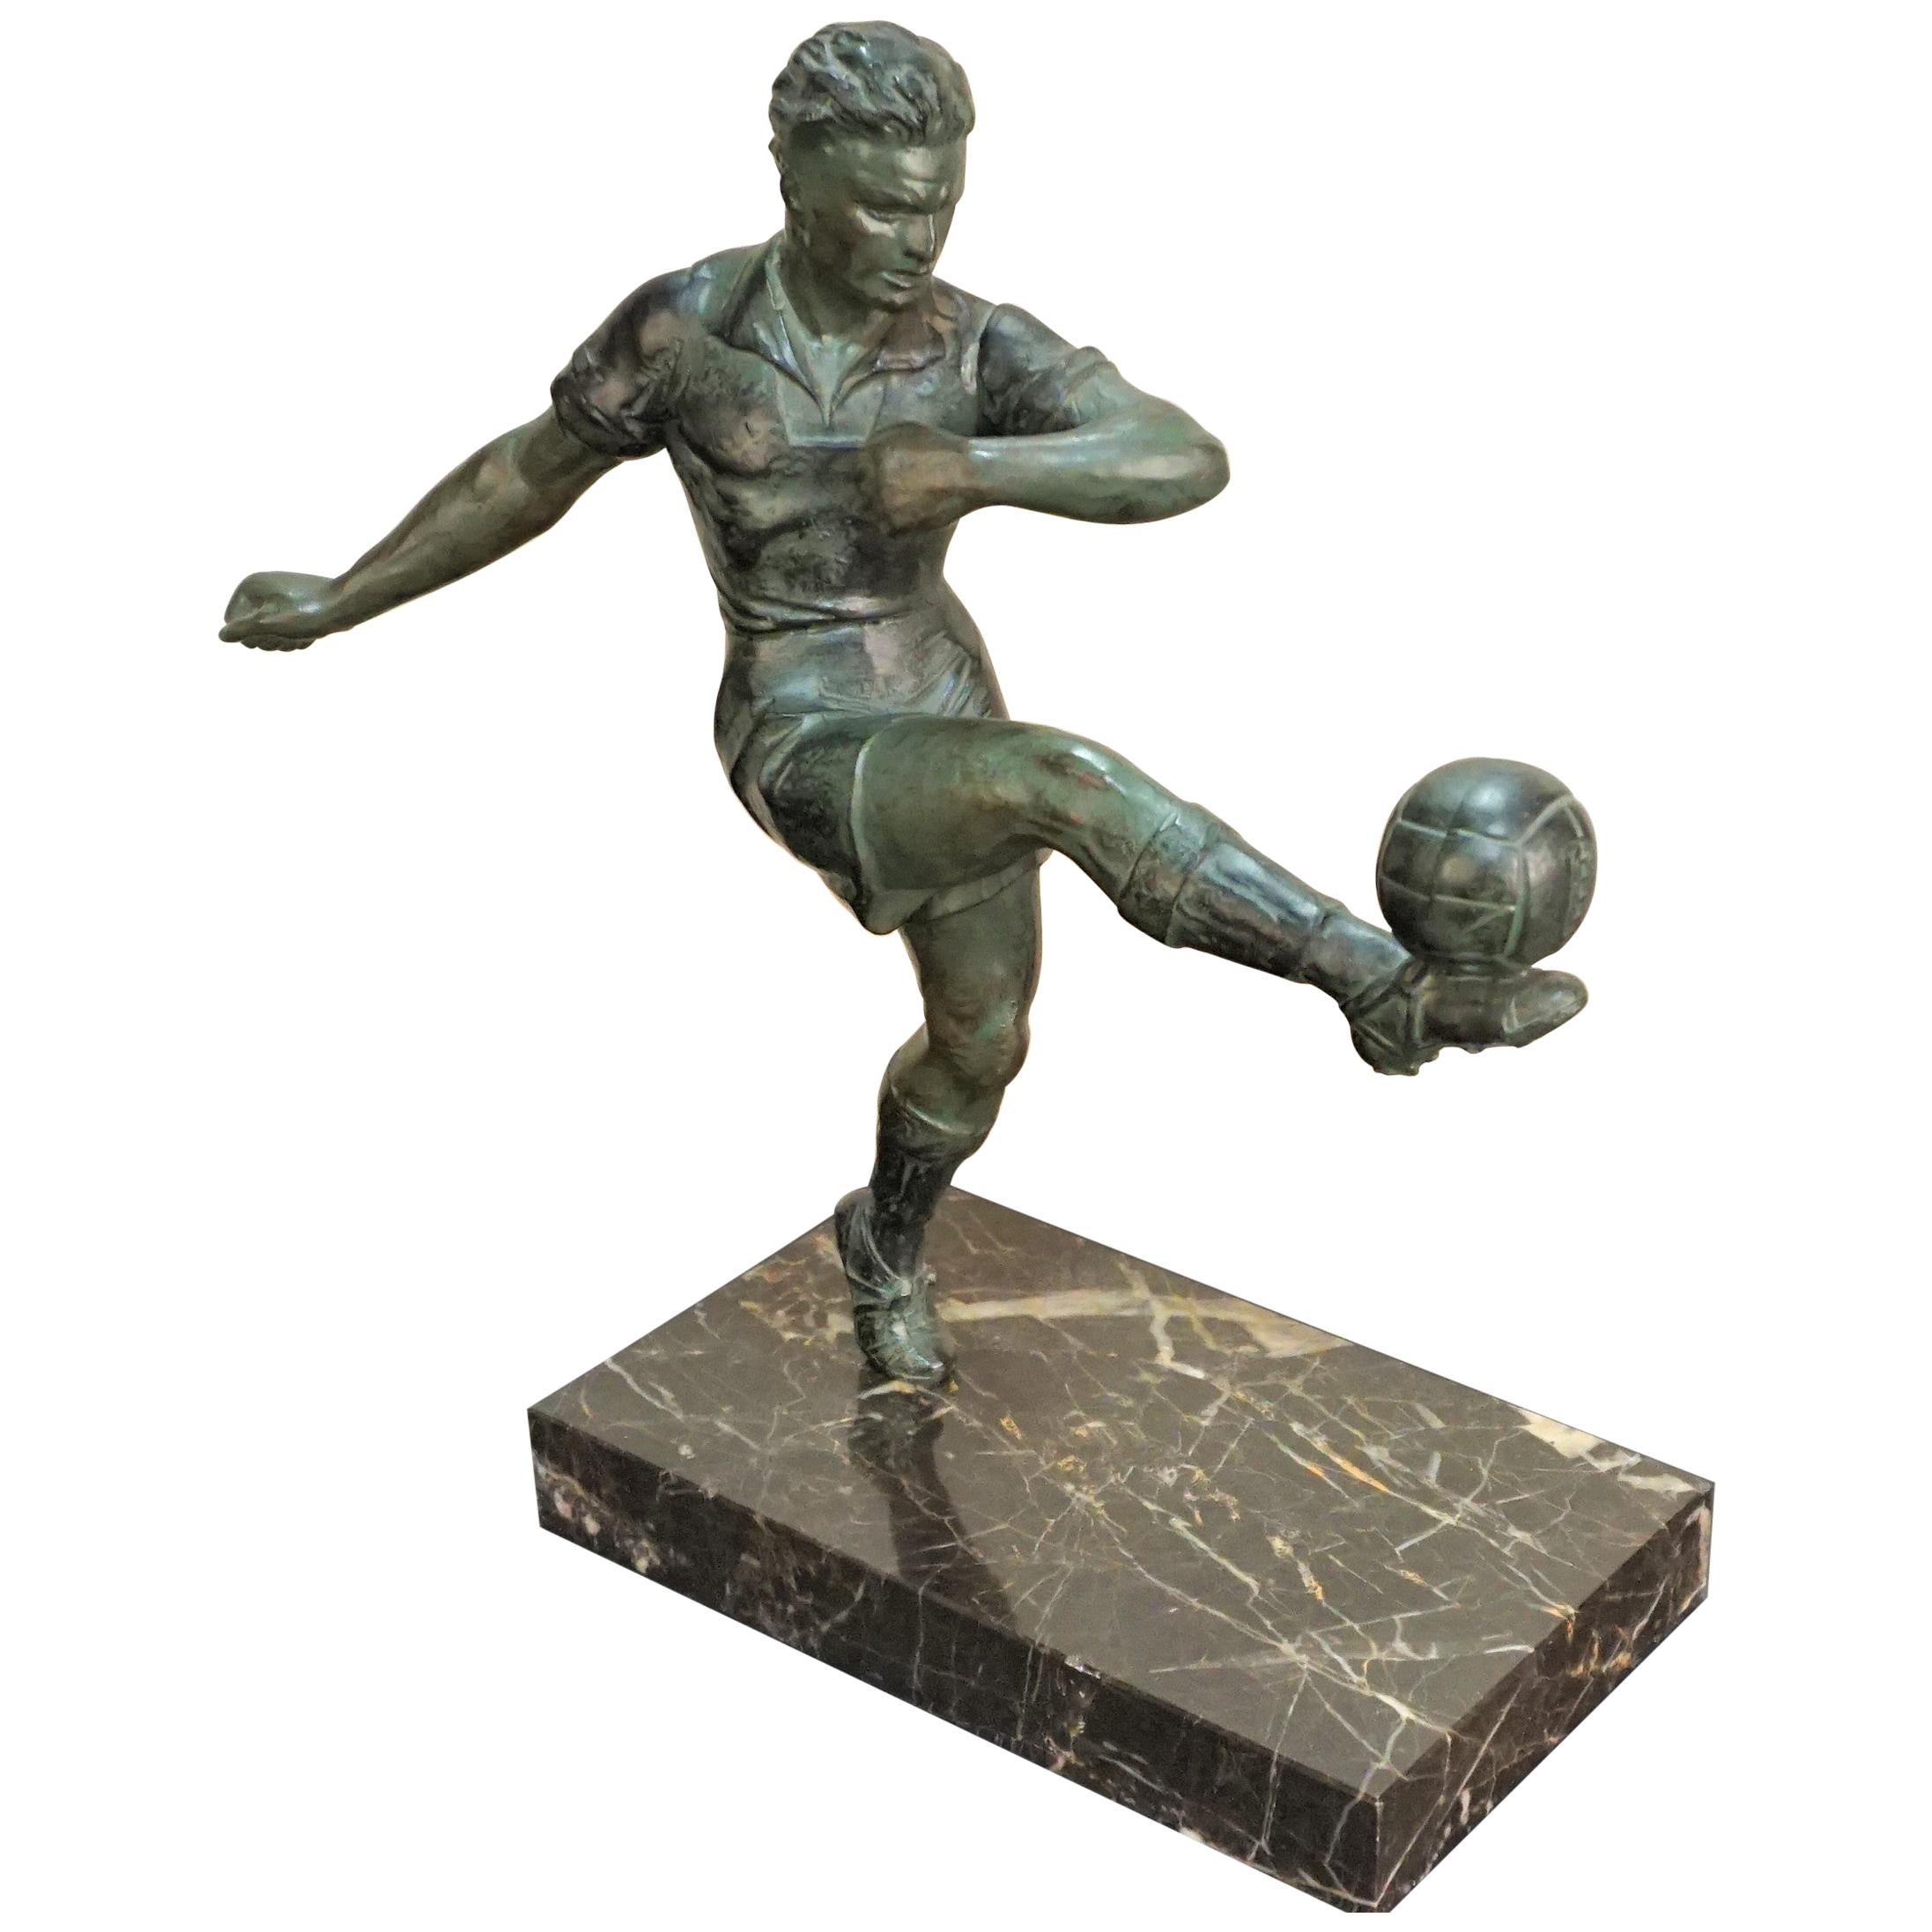 French 1930s Art Deco Soccer or Football Player Sculpture